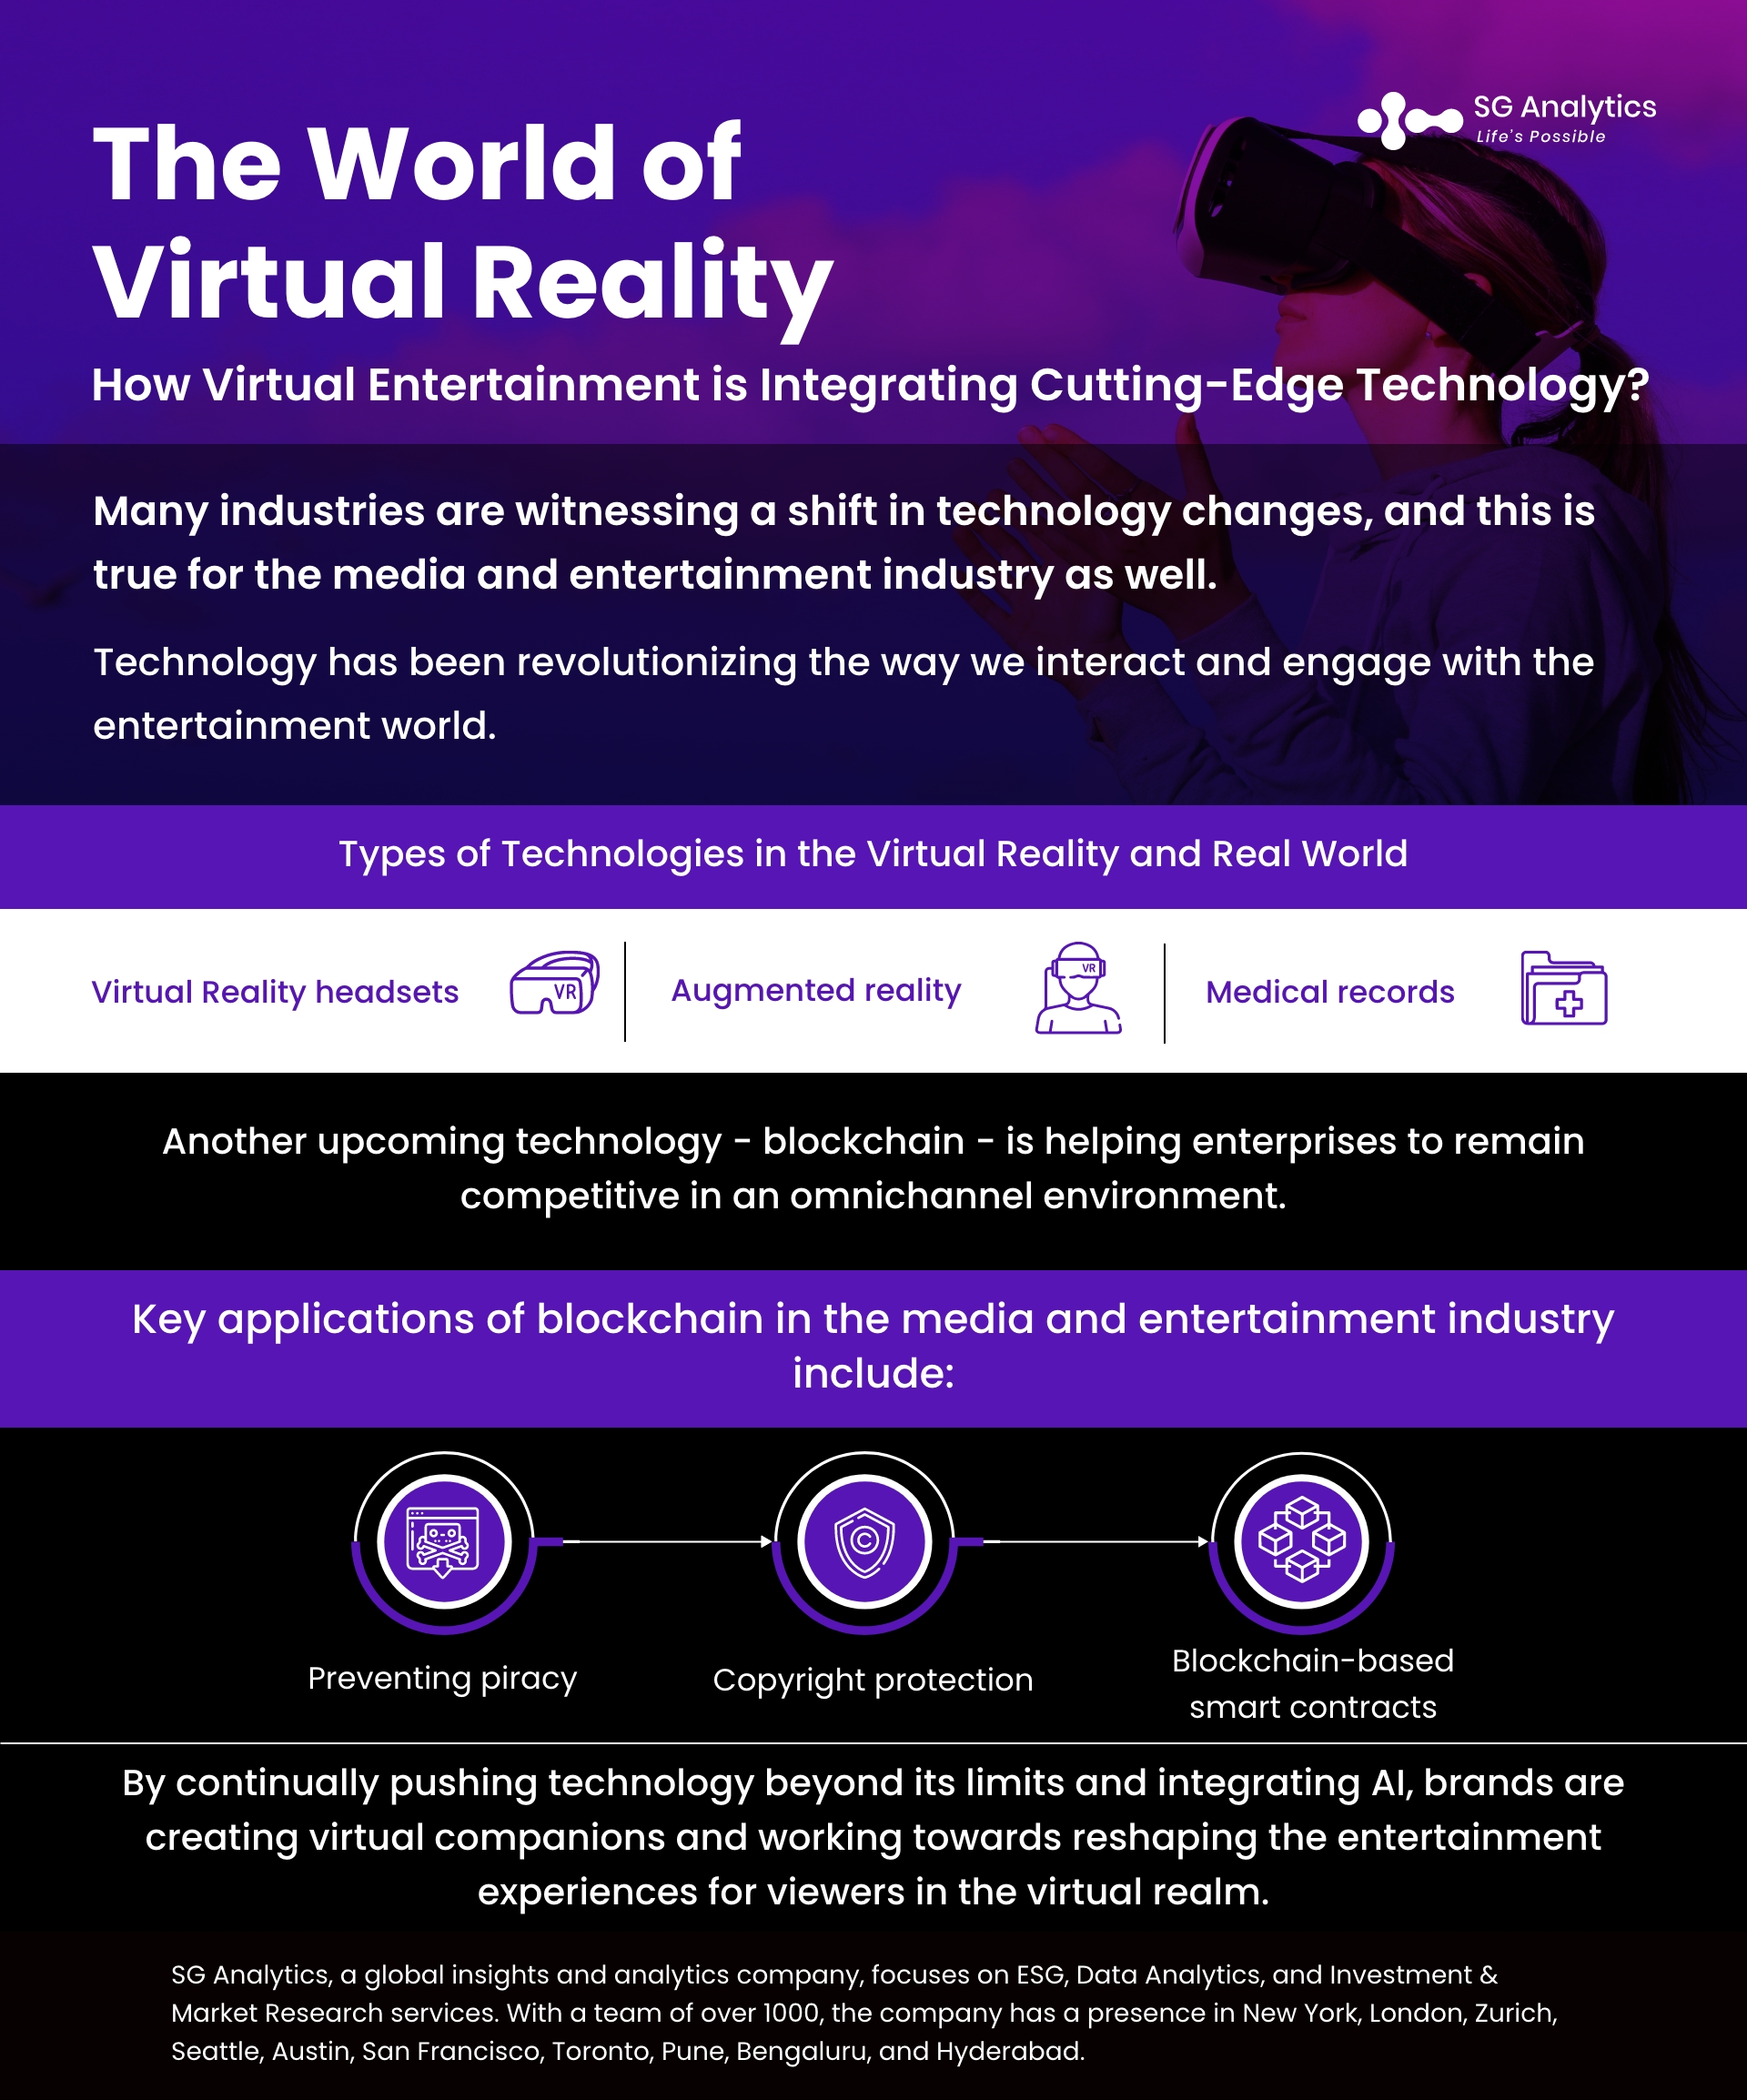 How Virtual Entertainment is Integrating Cutting-Edge Technology?